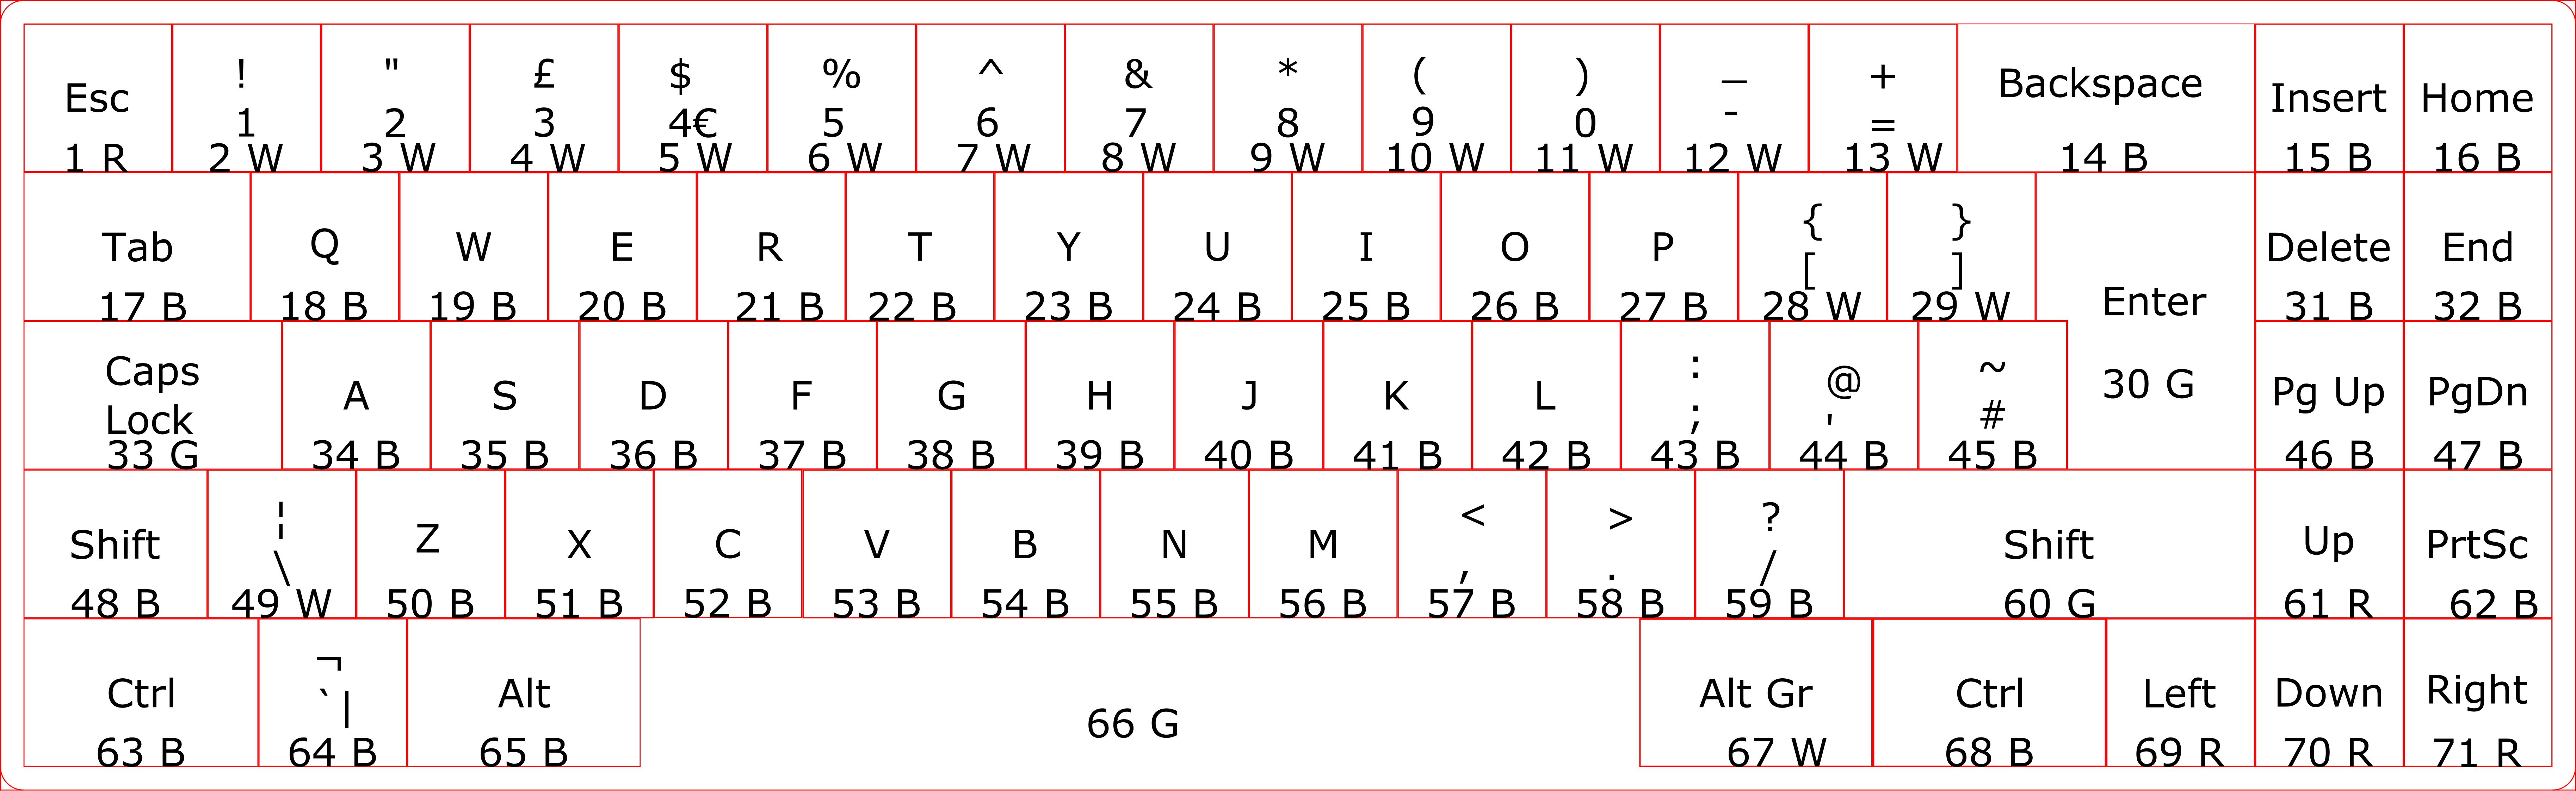 Keyboard layout (With letters, Numbers and Switches).png